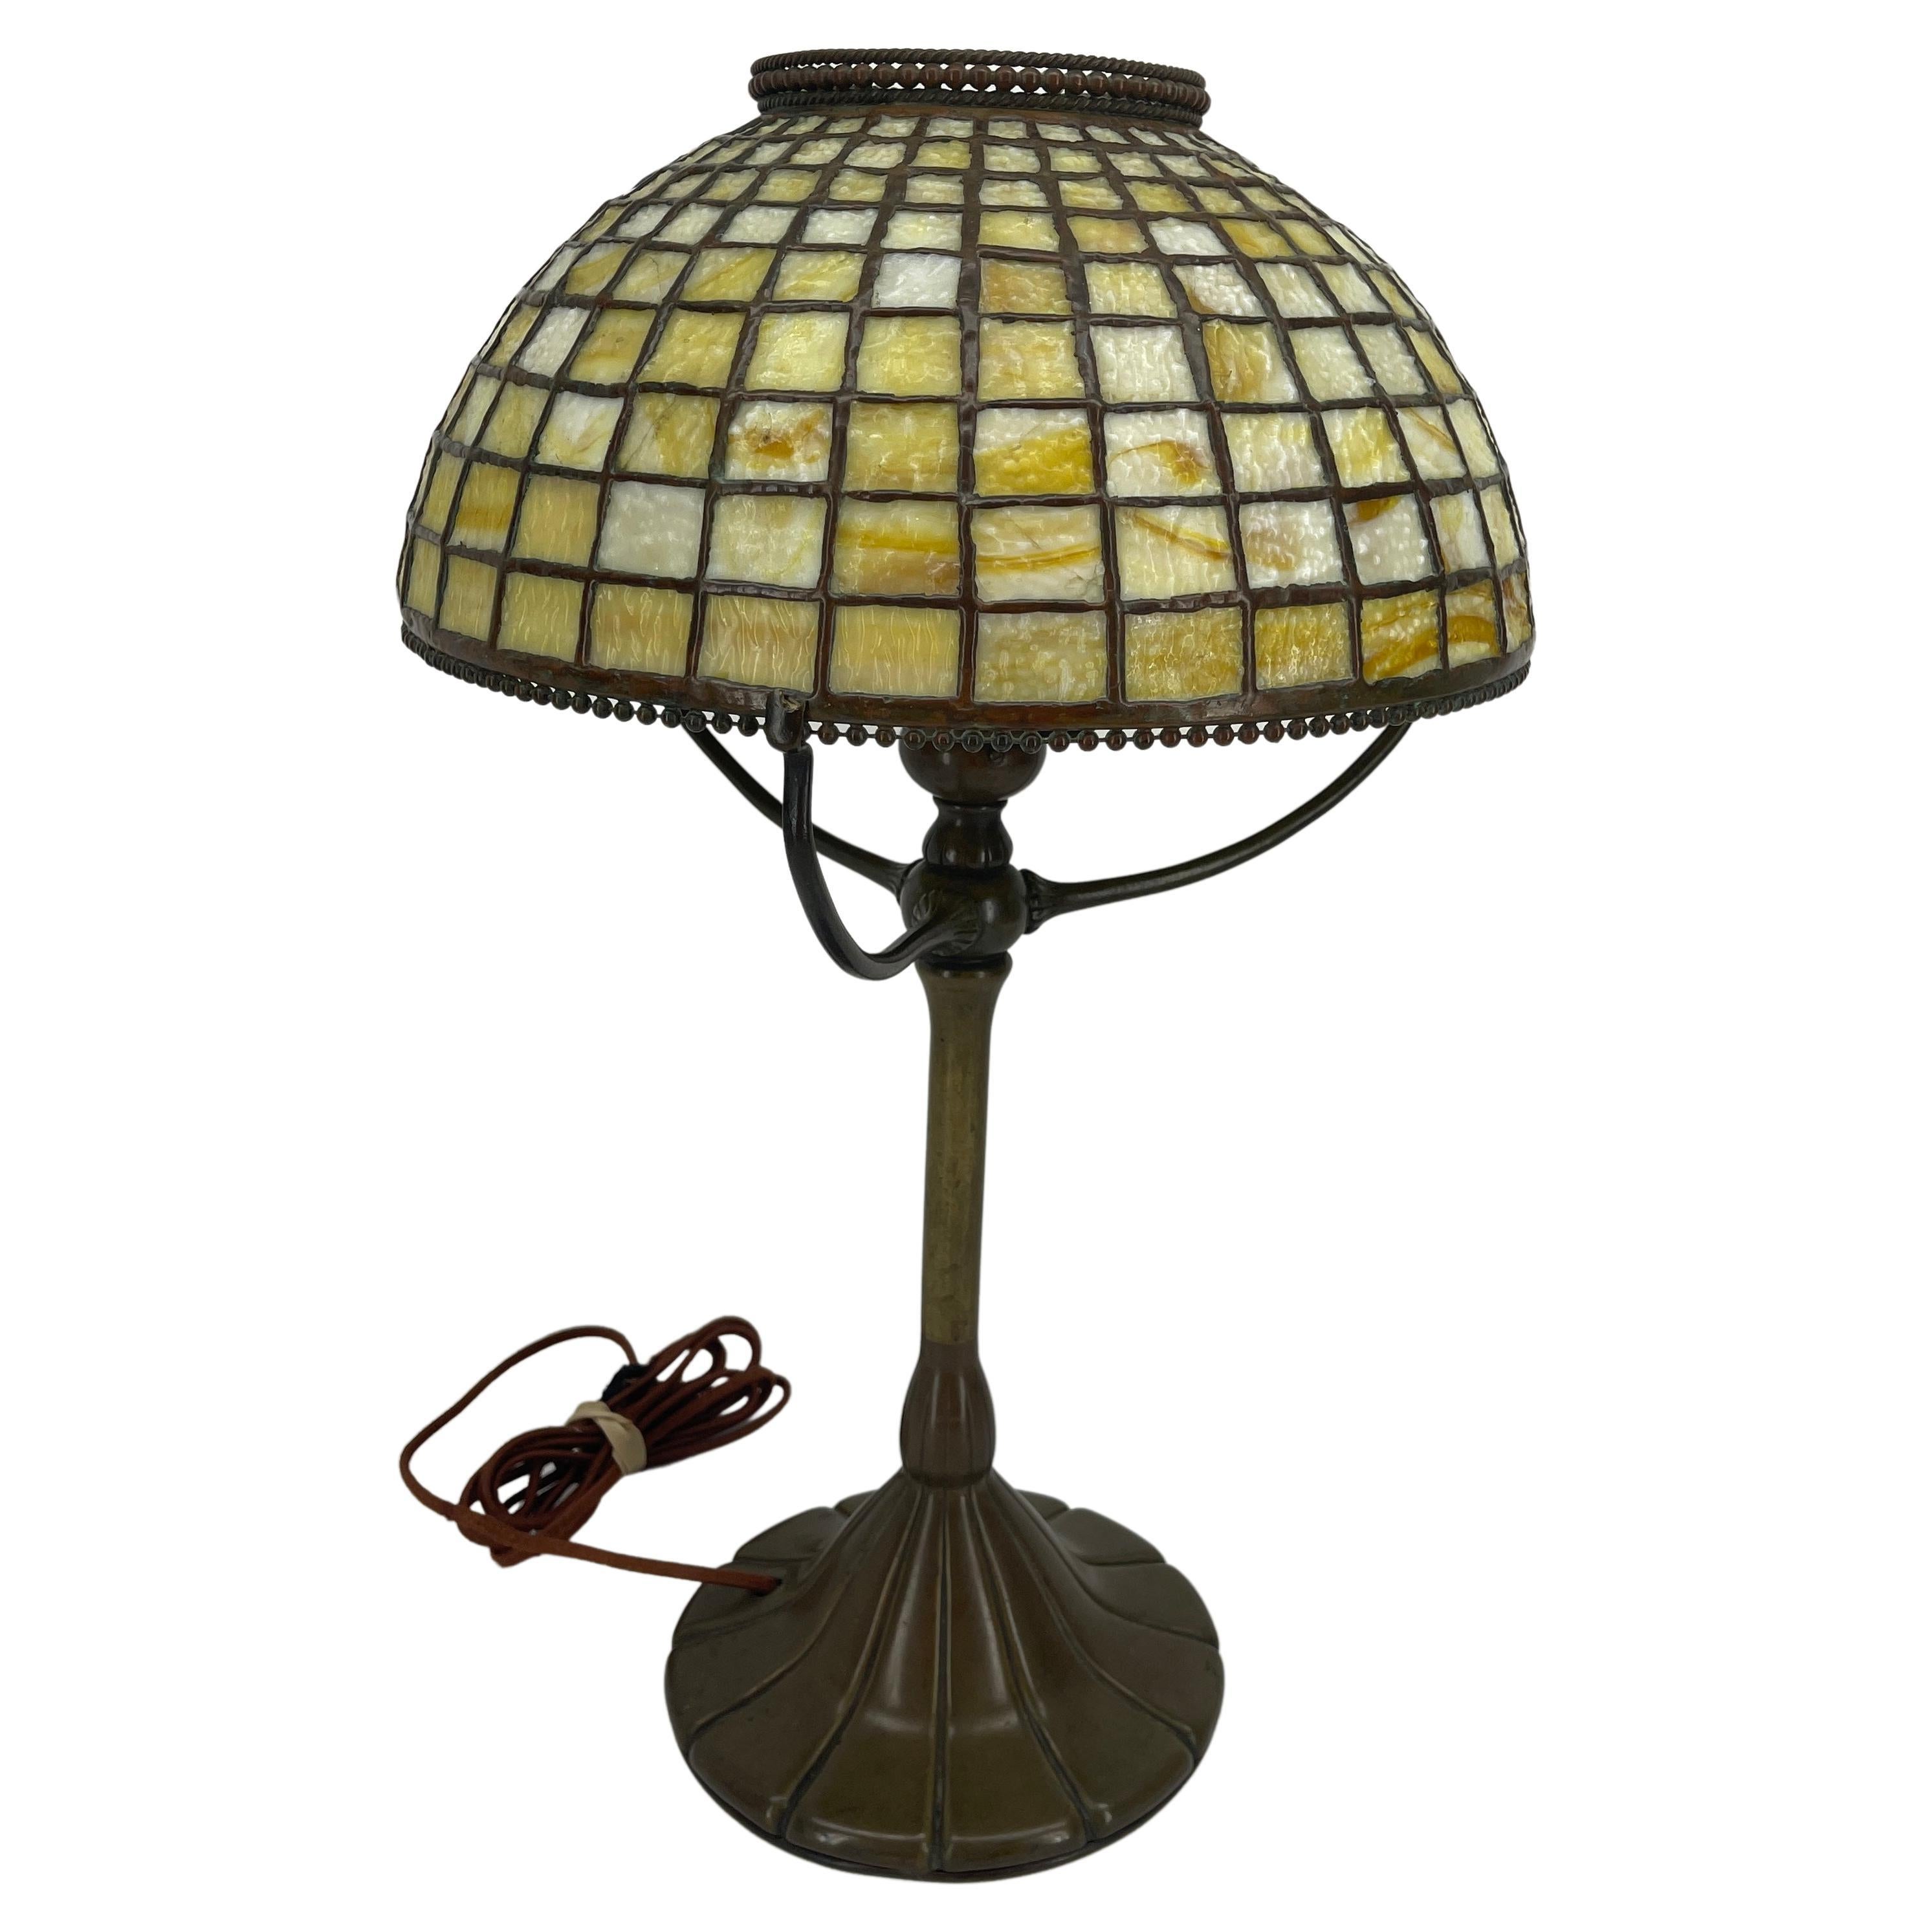 This vintage early 20th Century leaded glass and bronze table lamp was made by the Tiffany Studios, New York. The handcrafted leaded shade is made up of yellow/amber stained tiles and features a beautiful bronze fringe. The shade rests upon a tripod